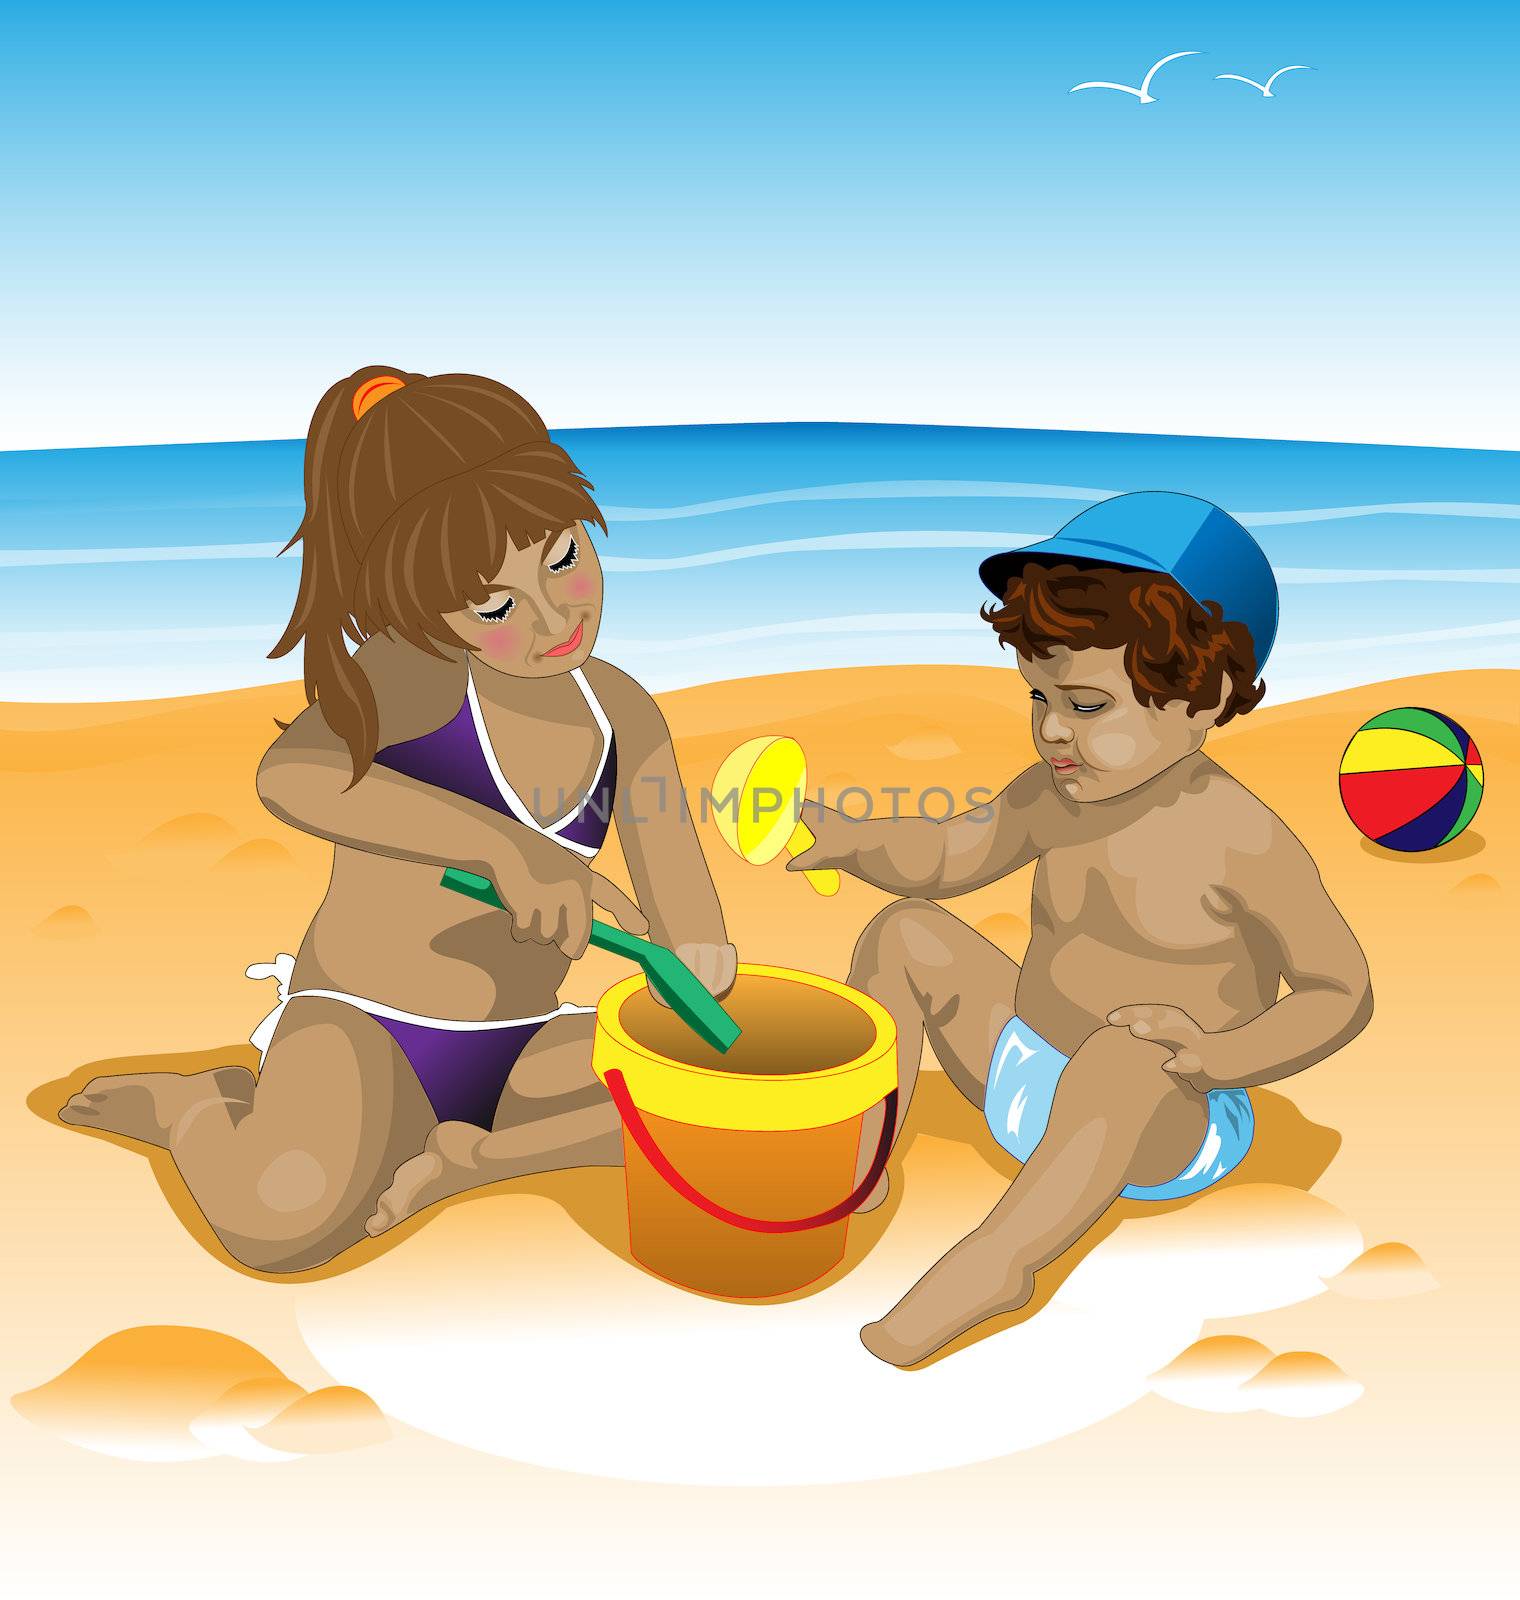 Children's illustration on the beach with toys